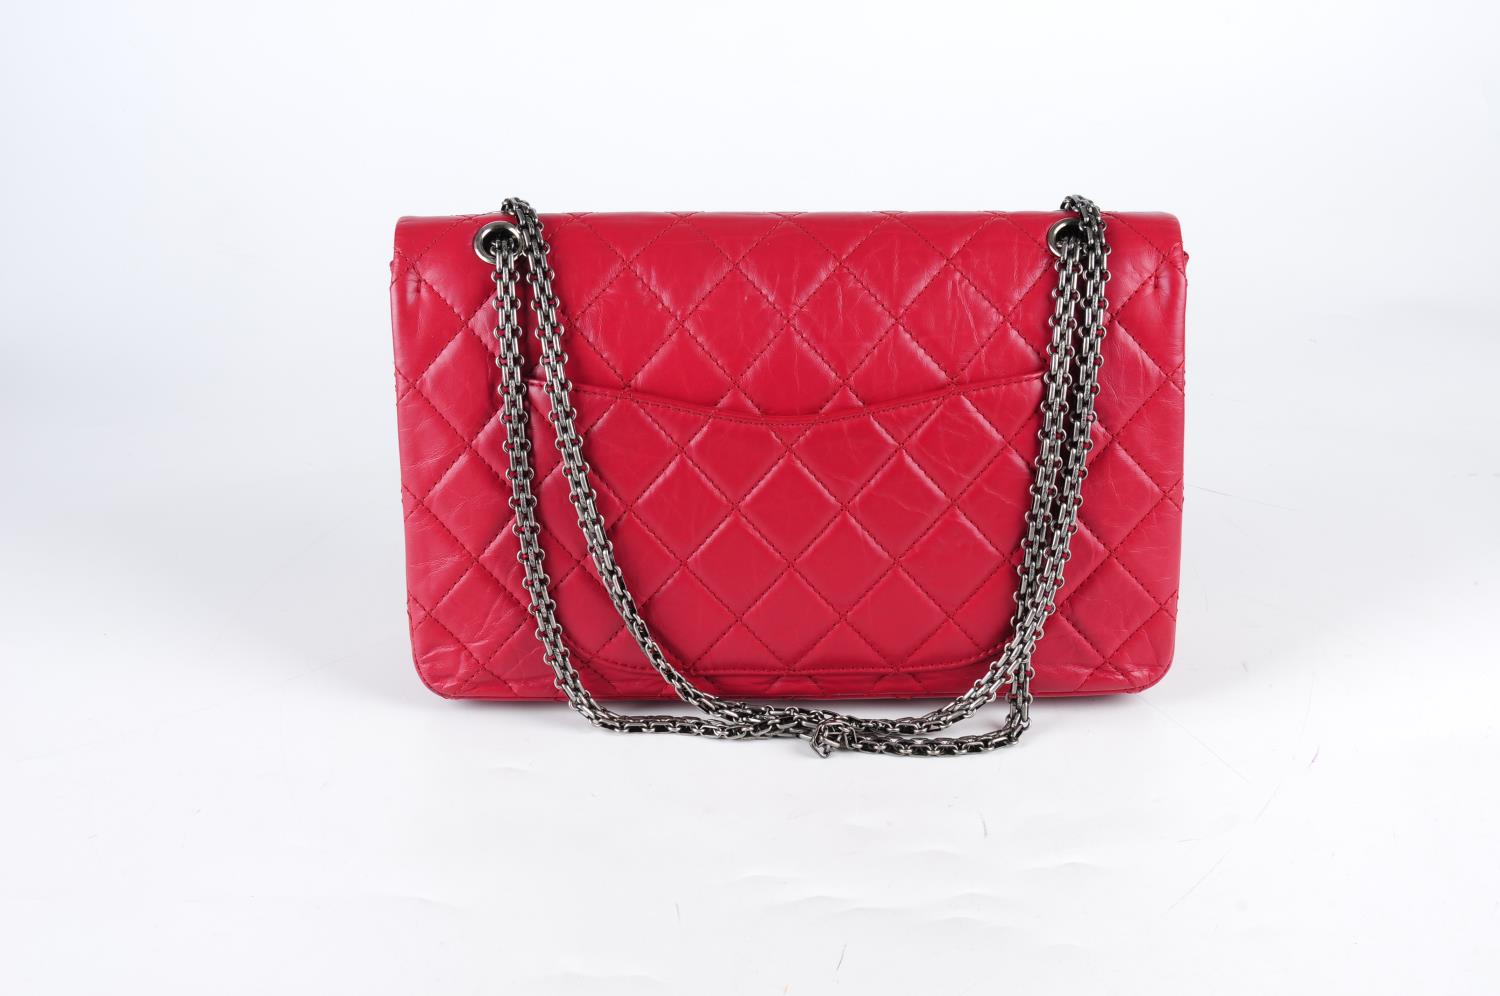 CHANEL - a red 2.55 Reissue 227 handbag. - Image 2 of 4